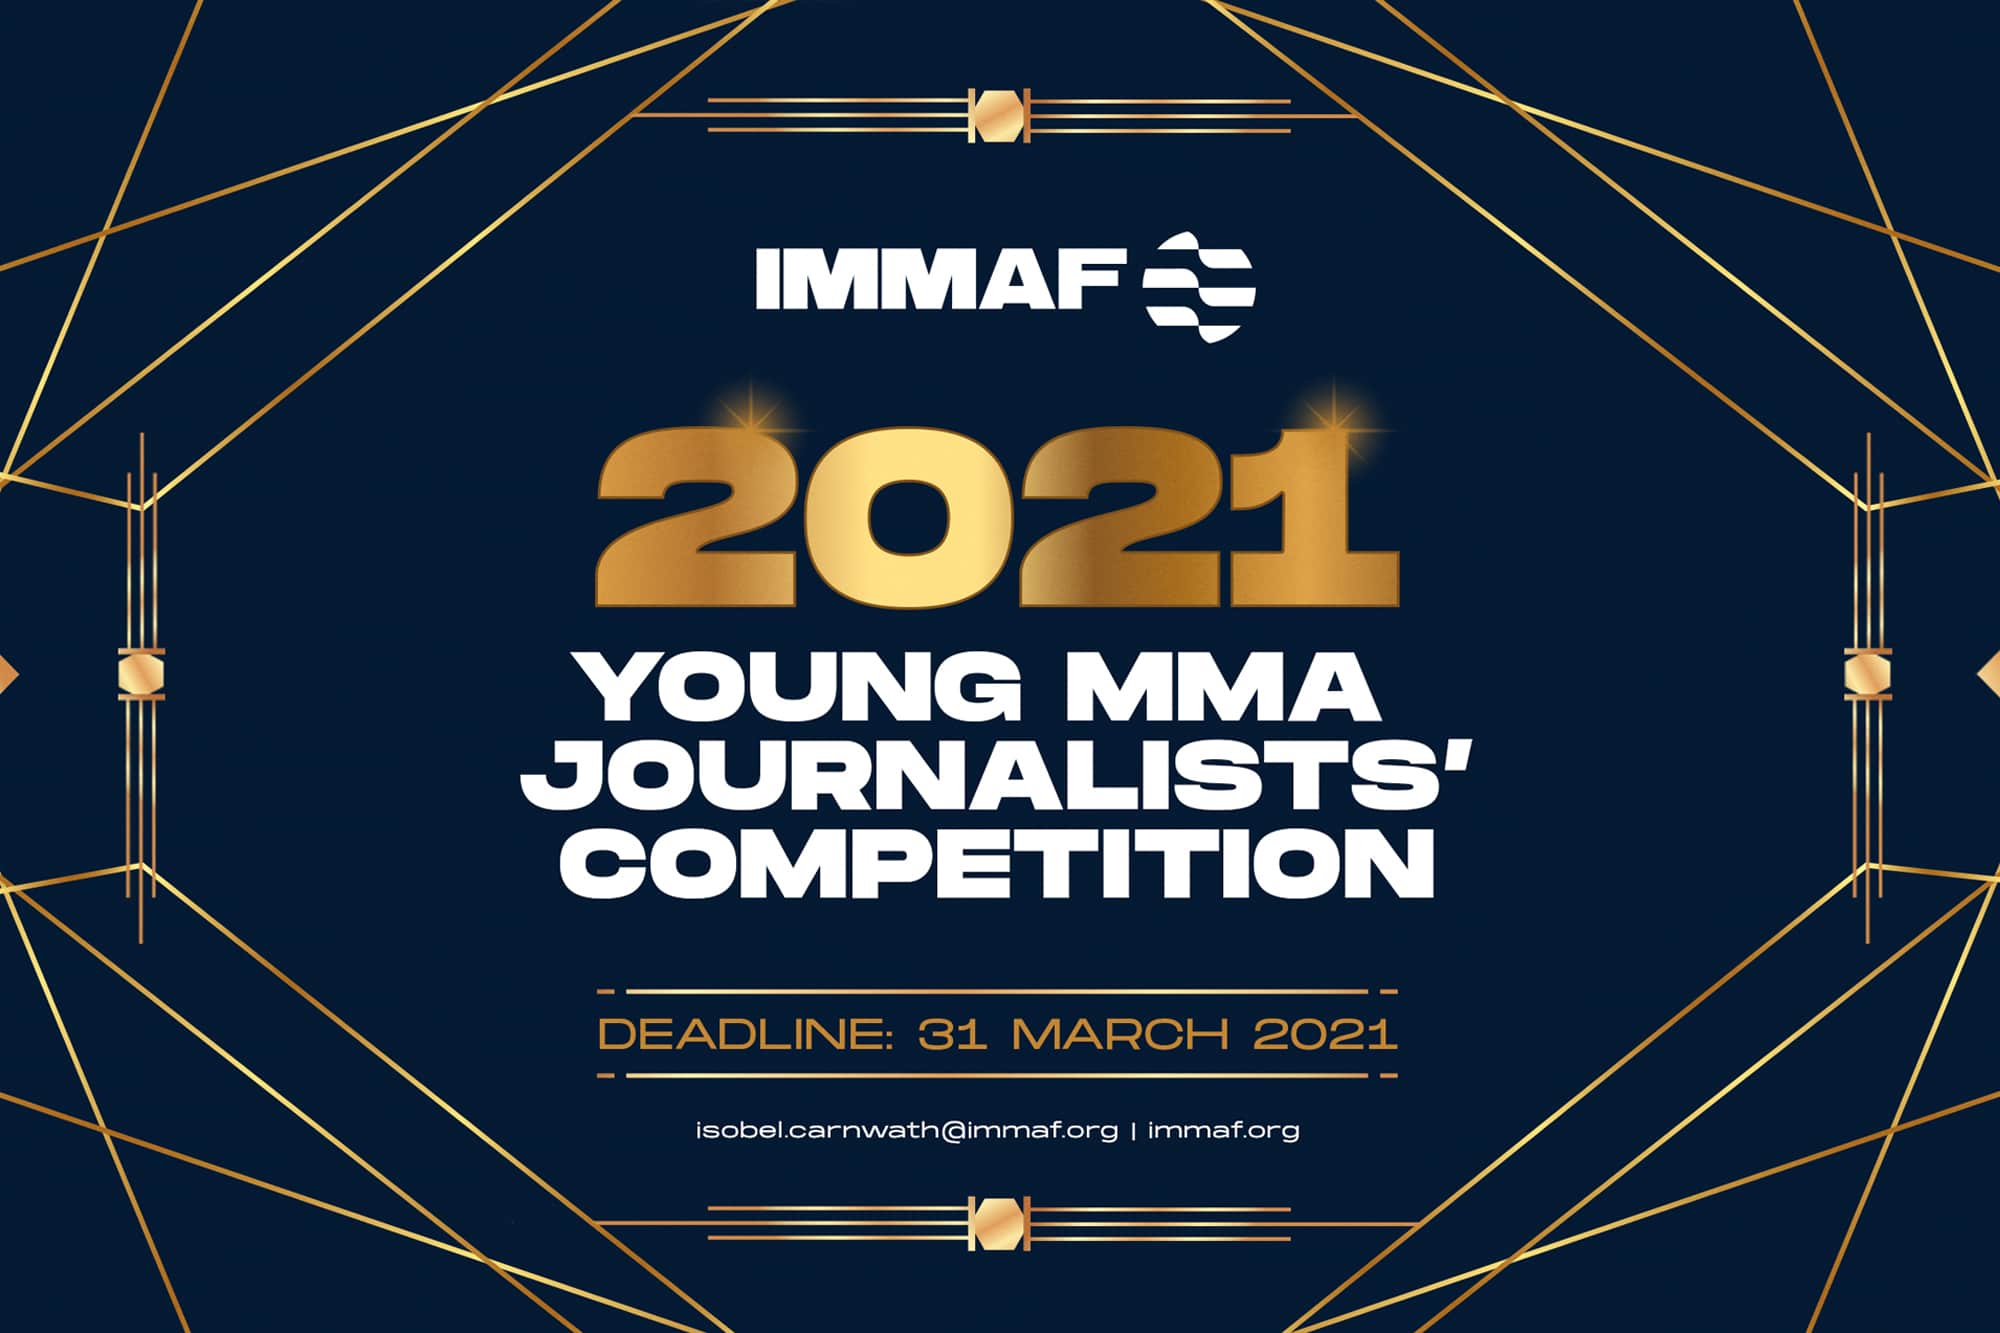 IMMAF Announces Shortlist for Young MMA Journalists’ Competition